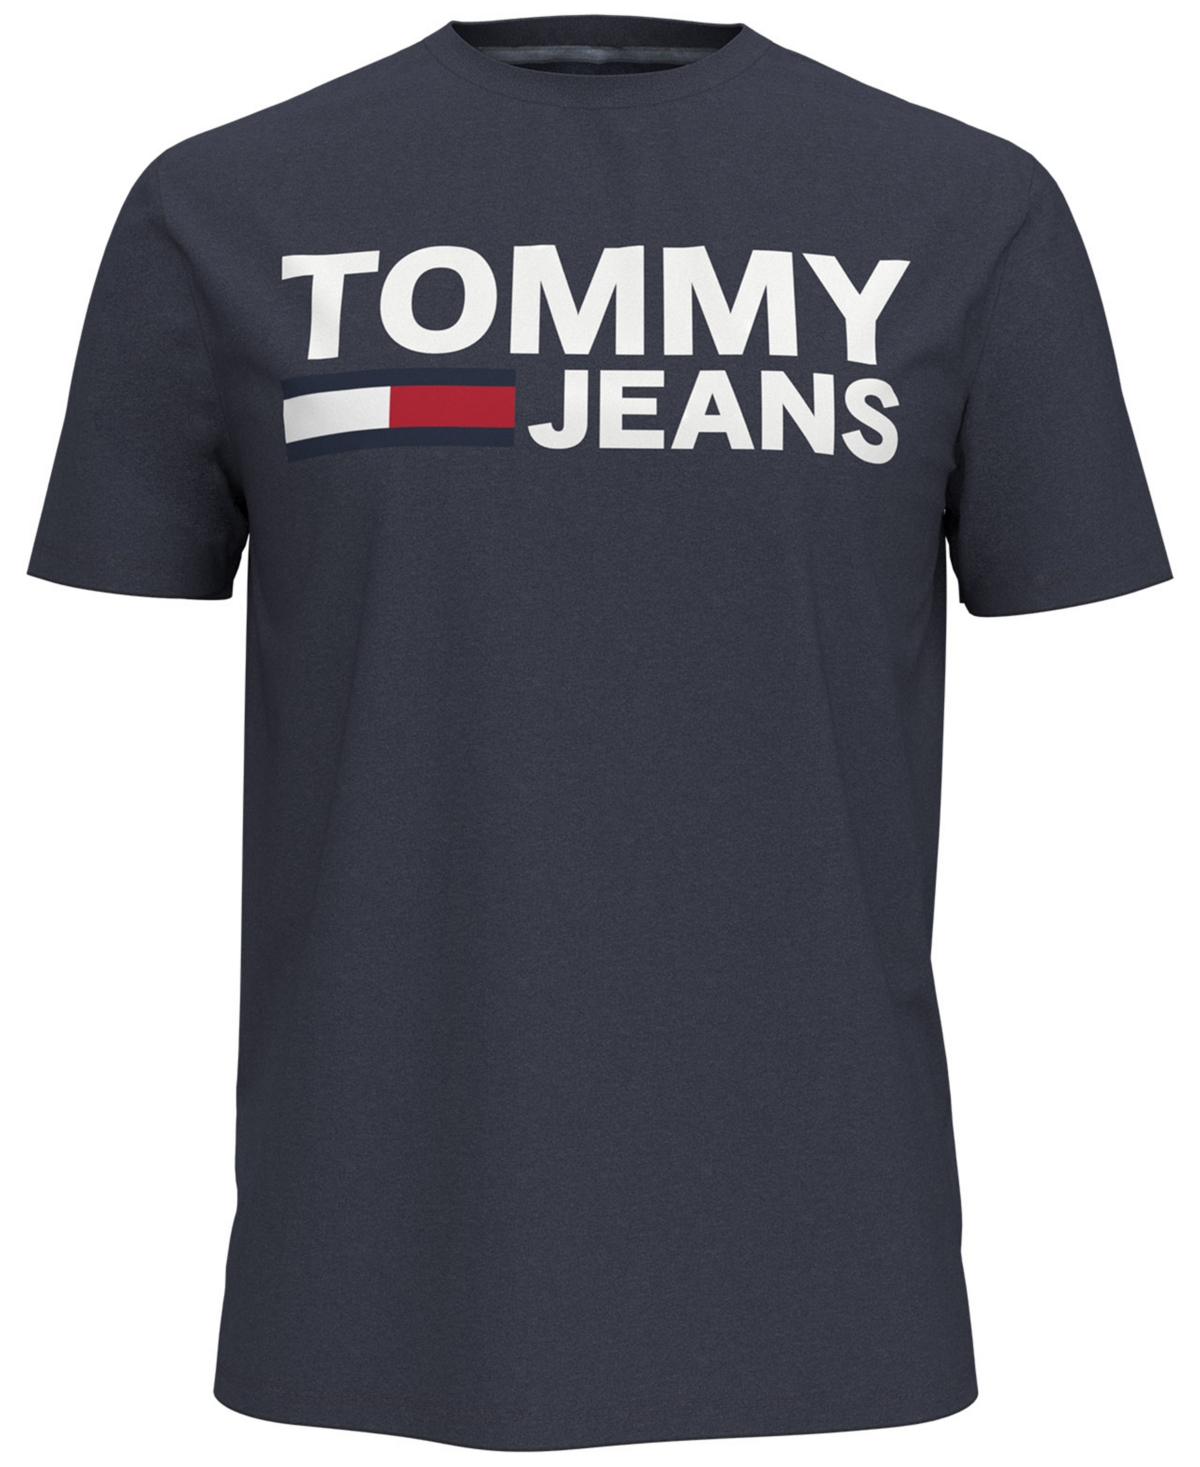 TOMMY HILFIGER MEN'S TOMMY JEANS LOCK UP LOGO GRAPHIC T-SHIRT